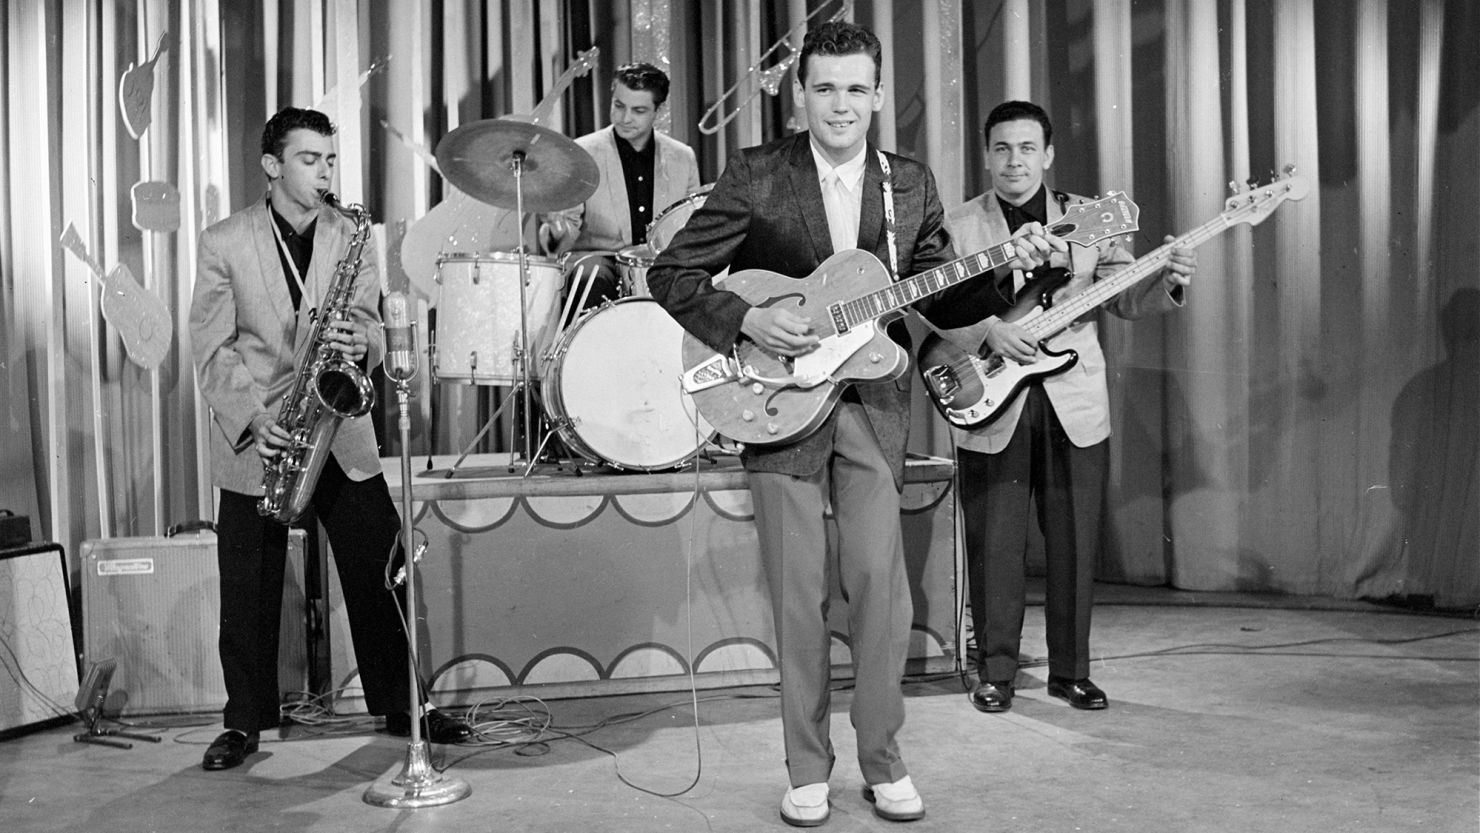 Eddy (second from right) pictured in August 1958.